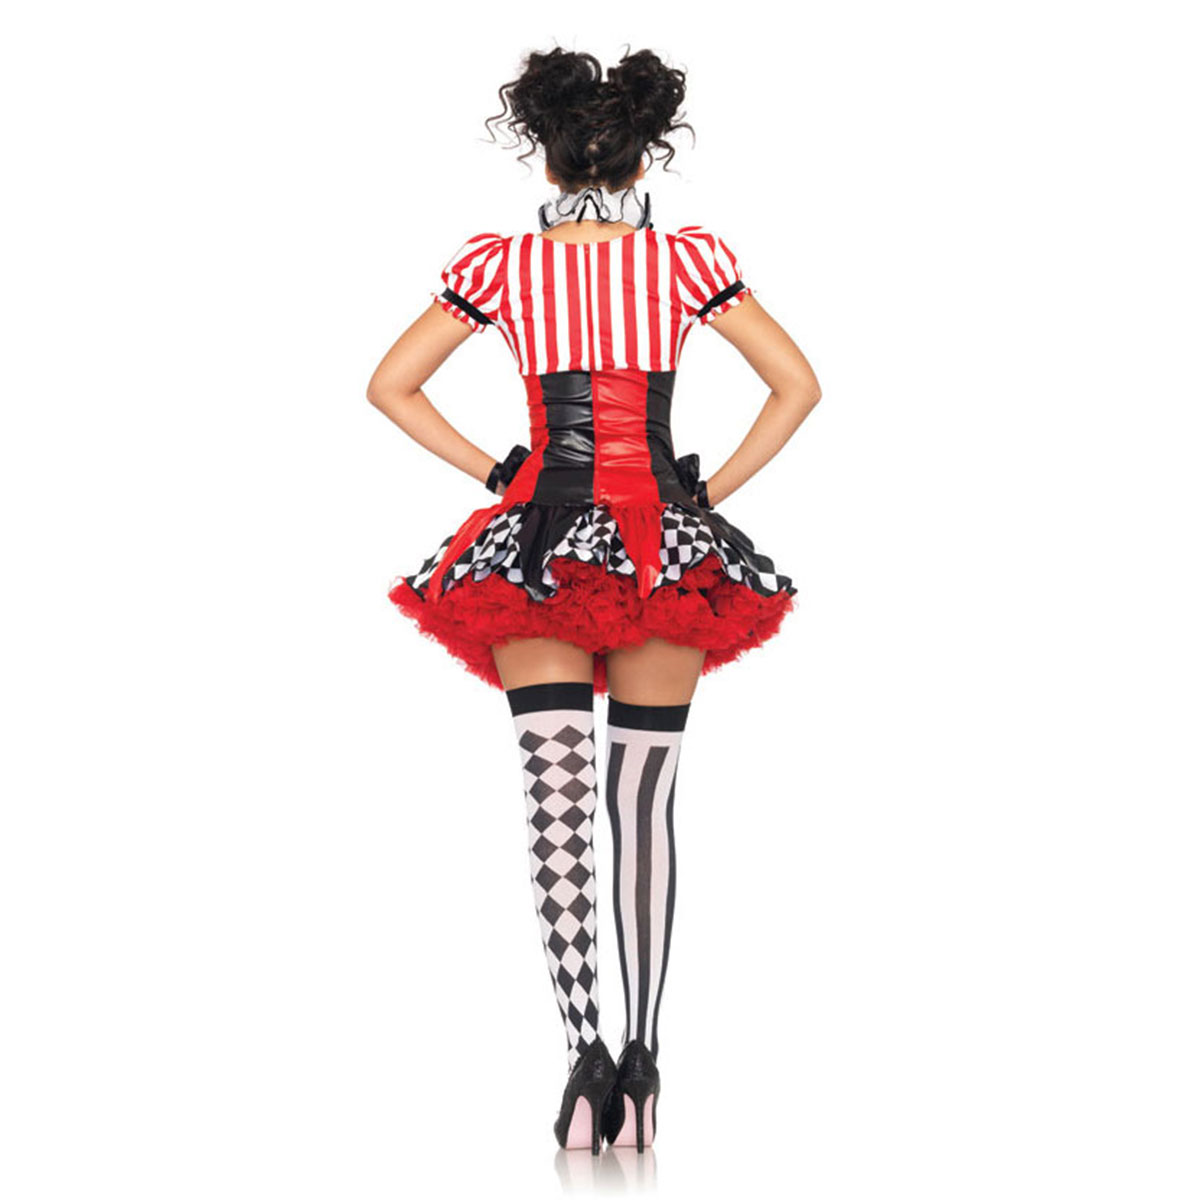 Sexy Le Belle Harlequin Circus Clown Gras Womens Adult Halloween Costume Large Ebay 2600